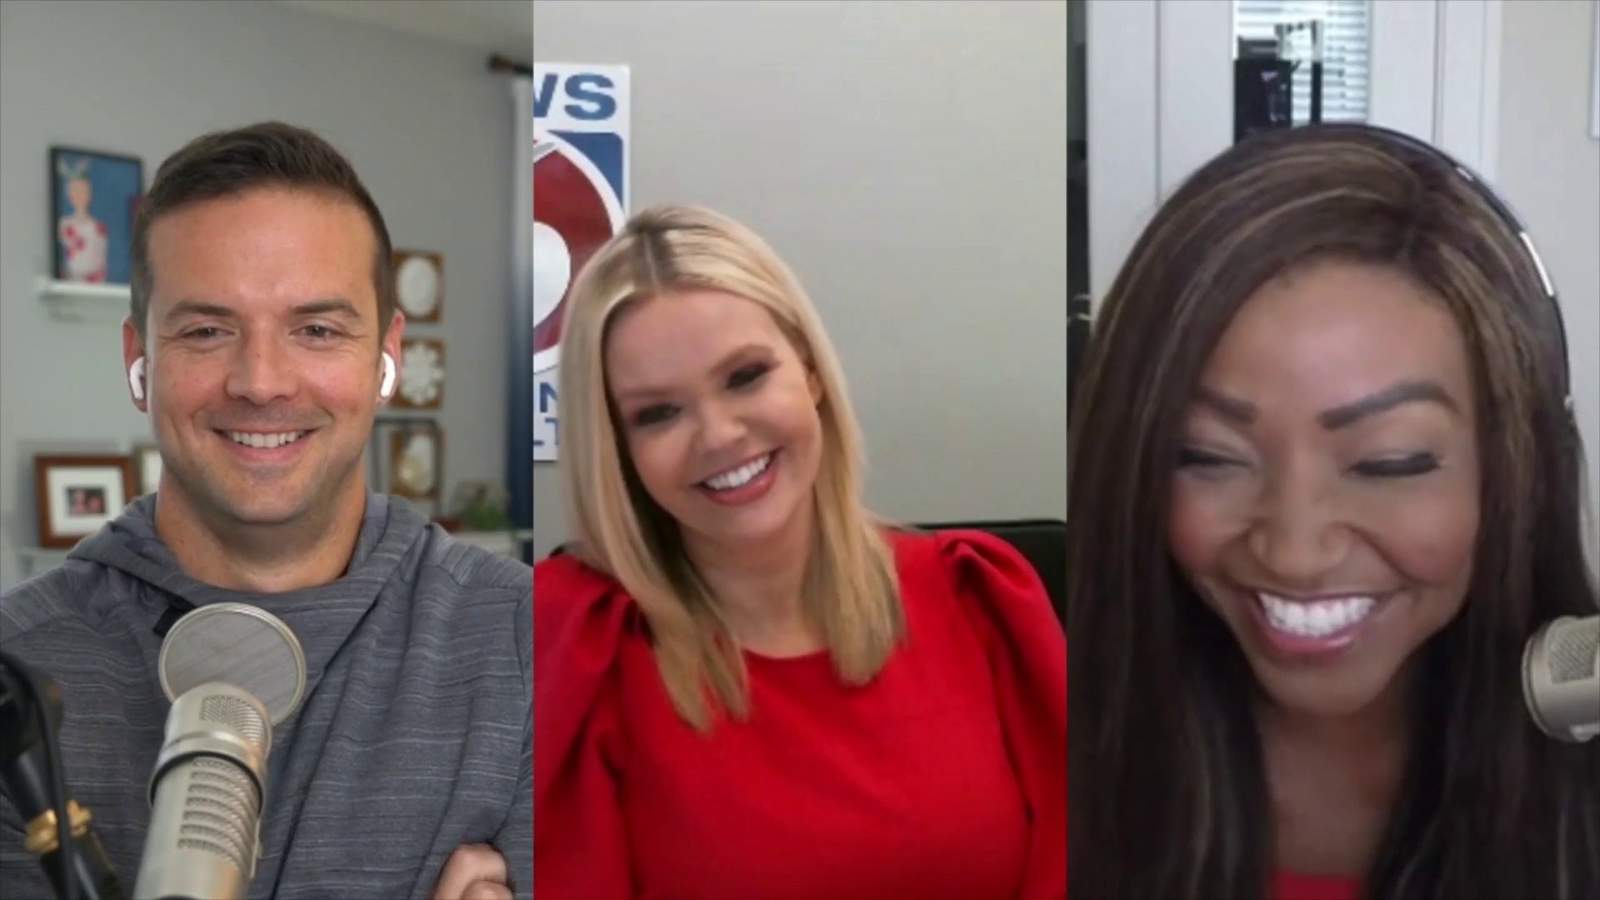 News 6 anchors share stories of flying chicken wings and other drama from small-town newsrooms